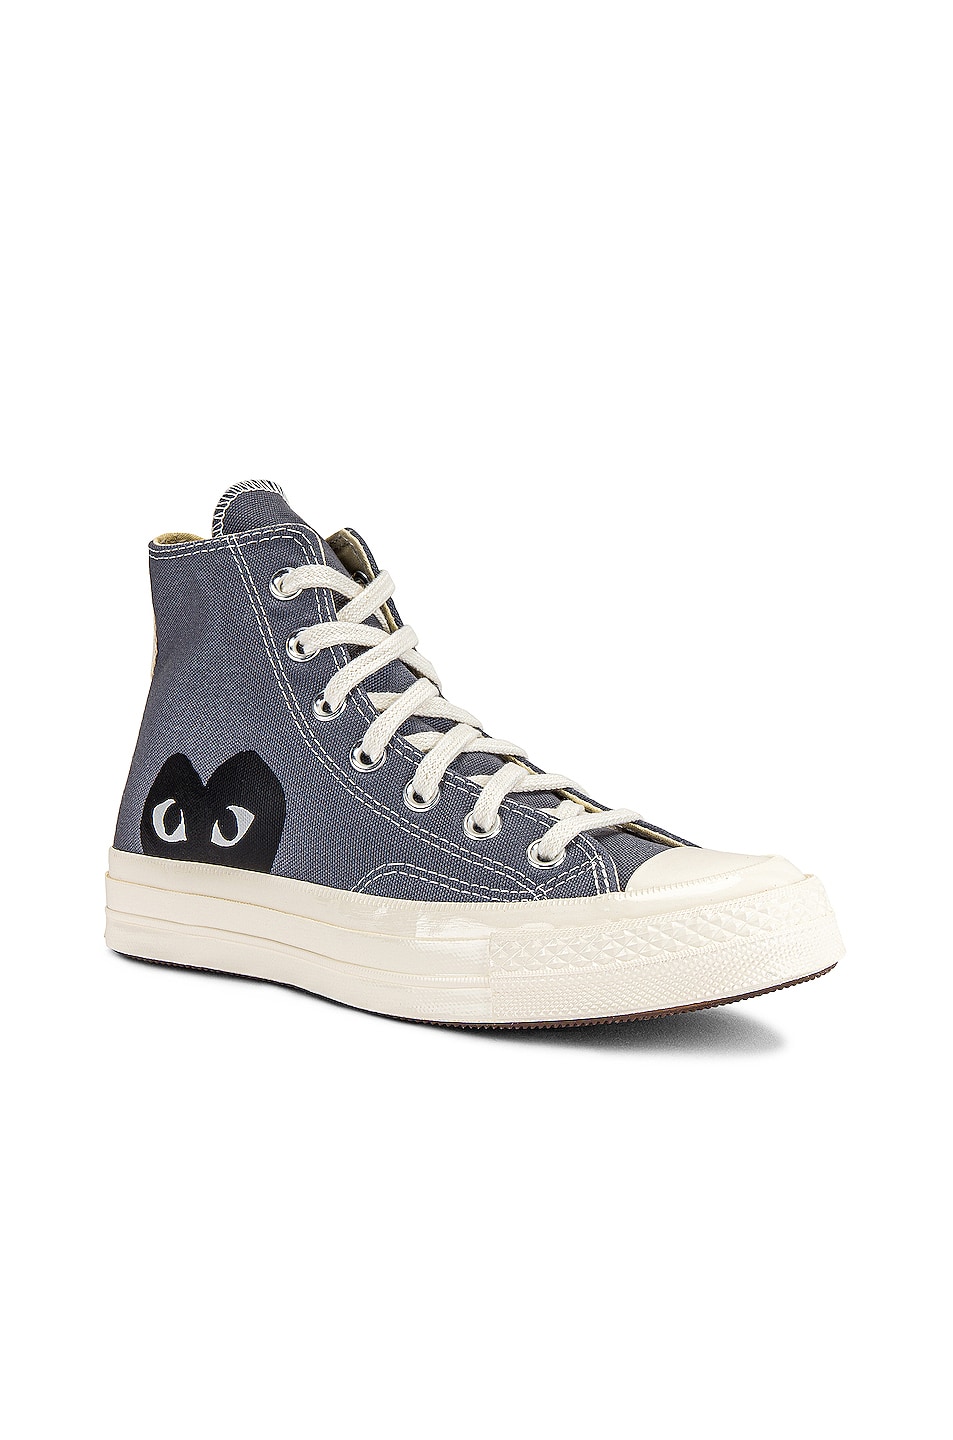 COMME des GARCONS PLAY Converse Chuck Taylor High in Grey | FWRD